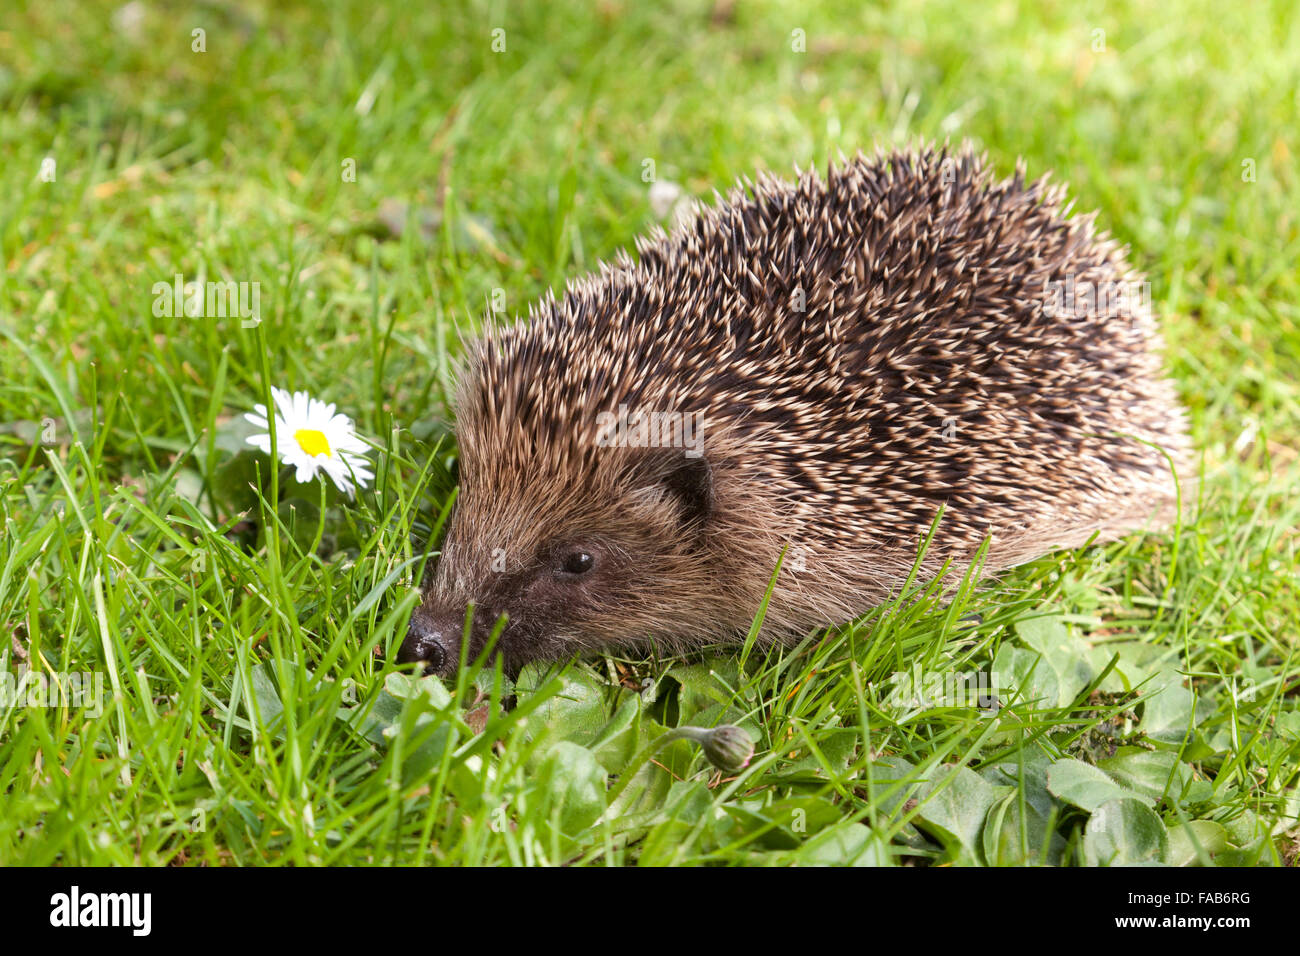 hedgehog on a lawn Stock Photo